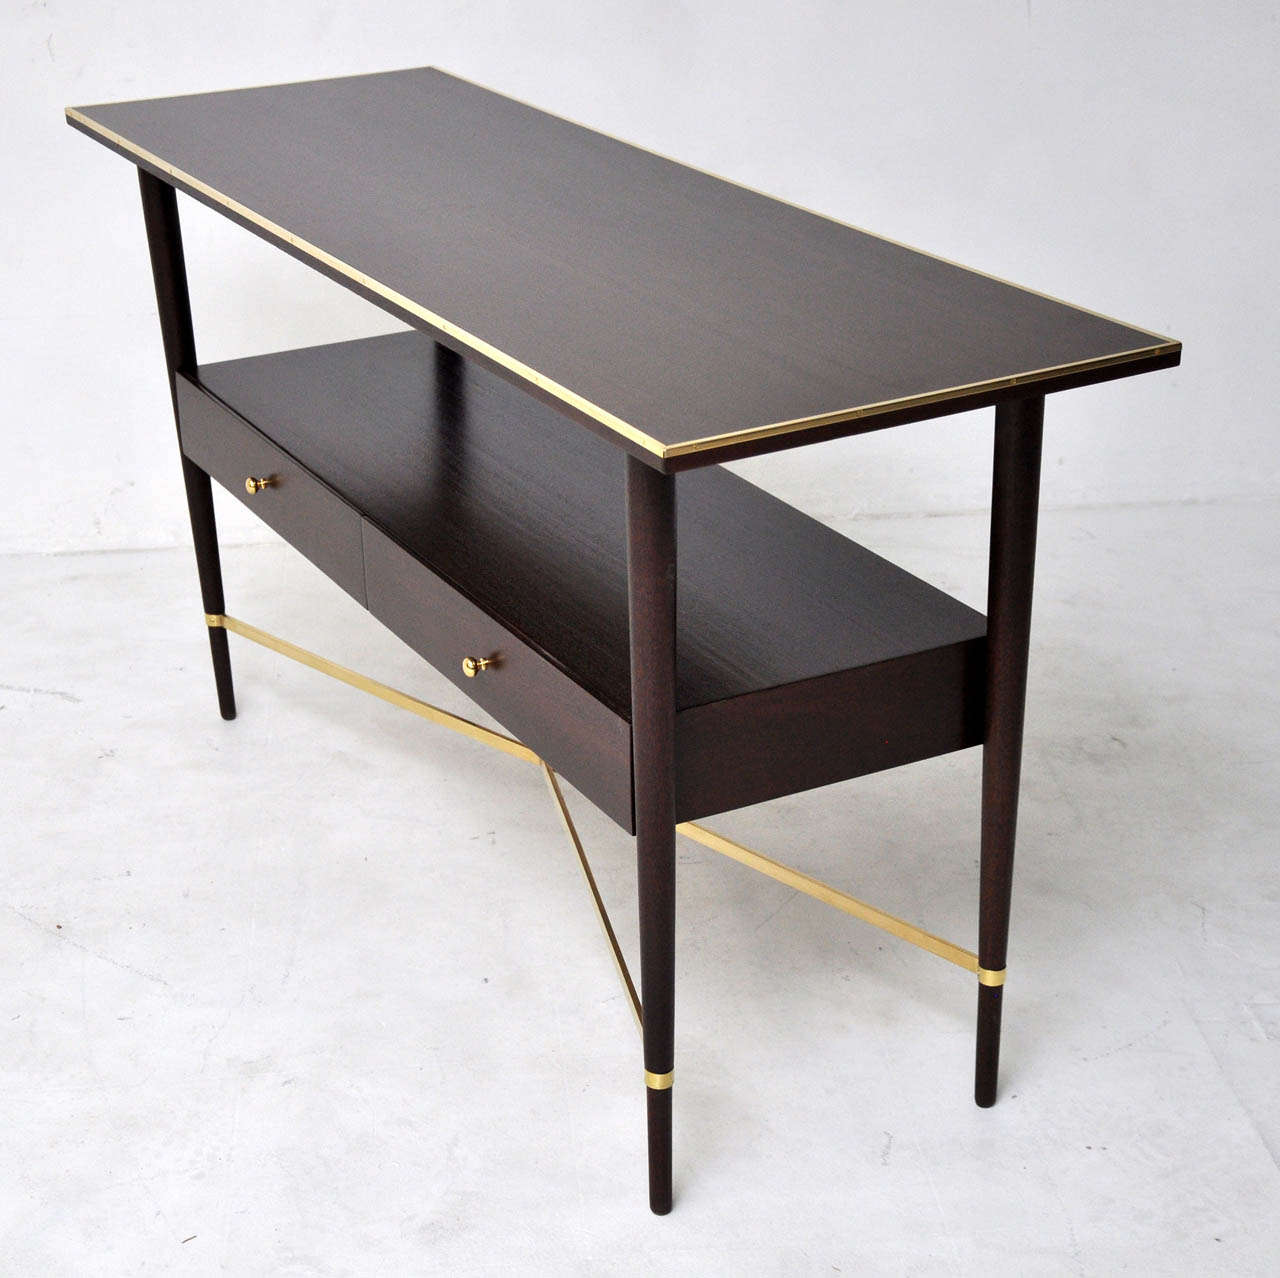 Paul McCobb Connoisseur Collection console table for H. Sacks. Fully restored in espresso finish. Brass X-base frame with brass details.